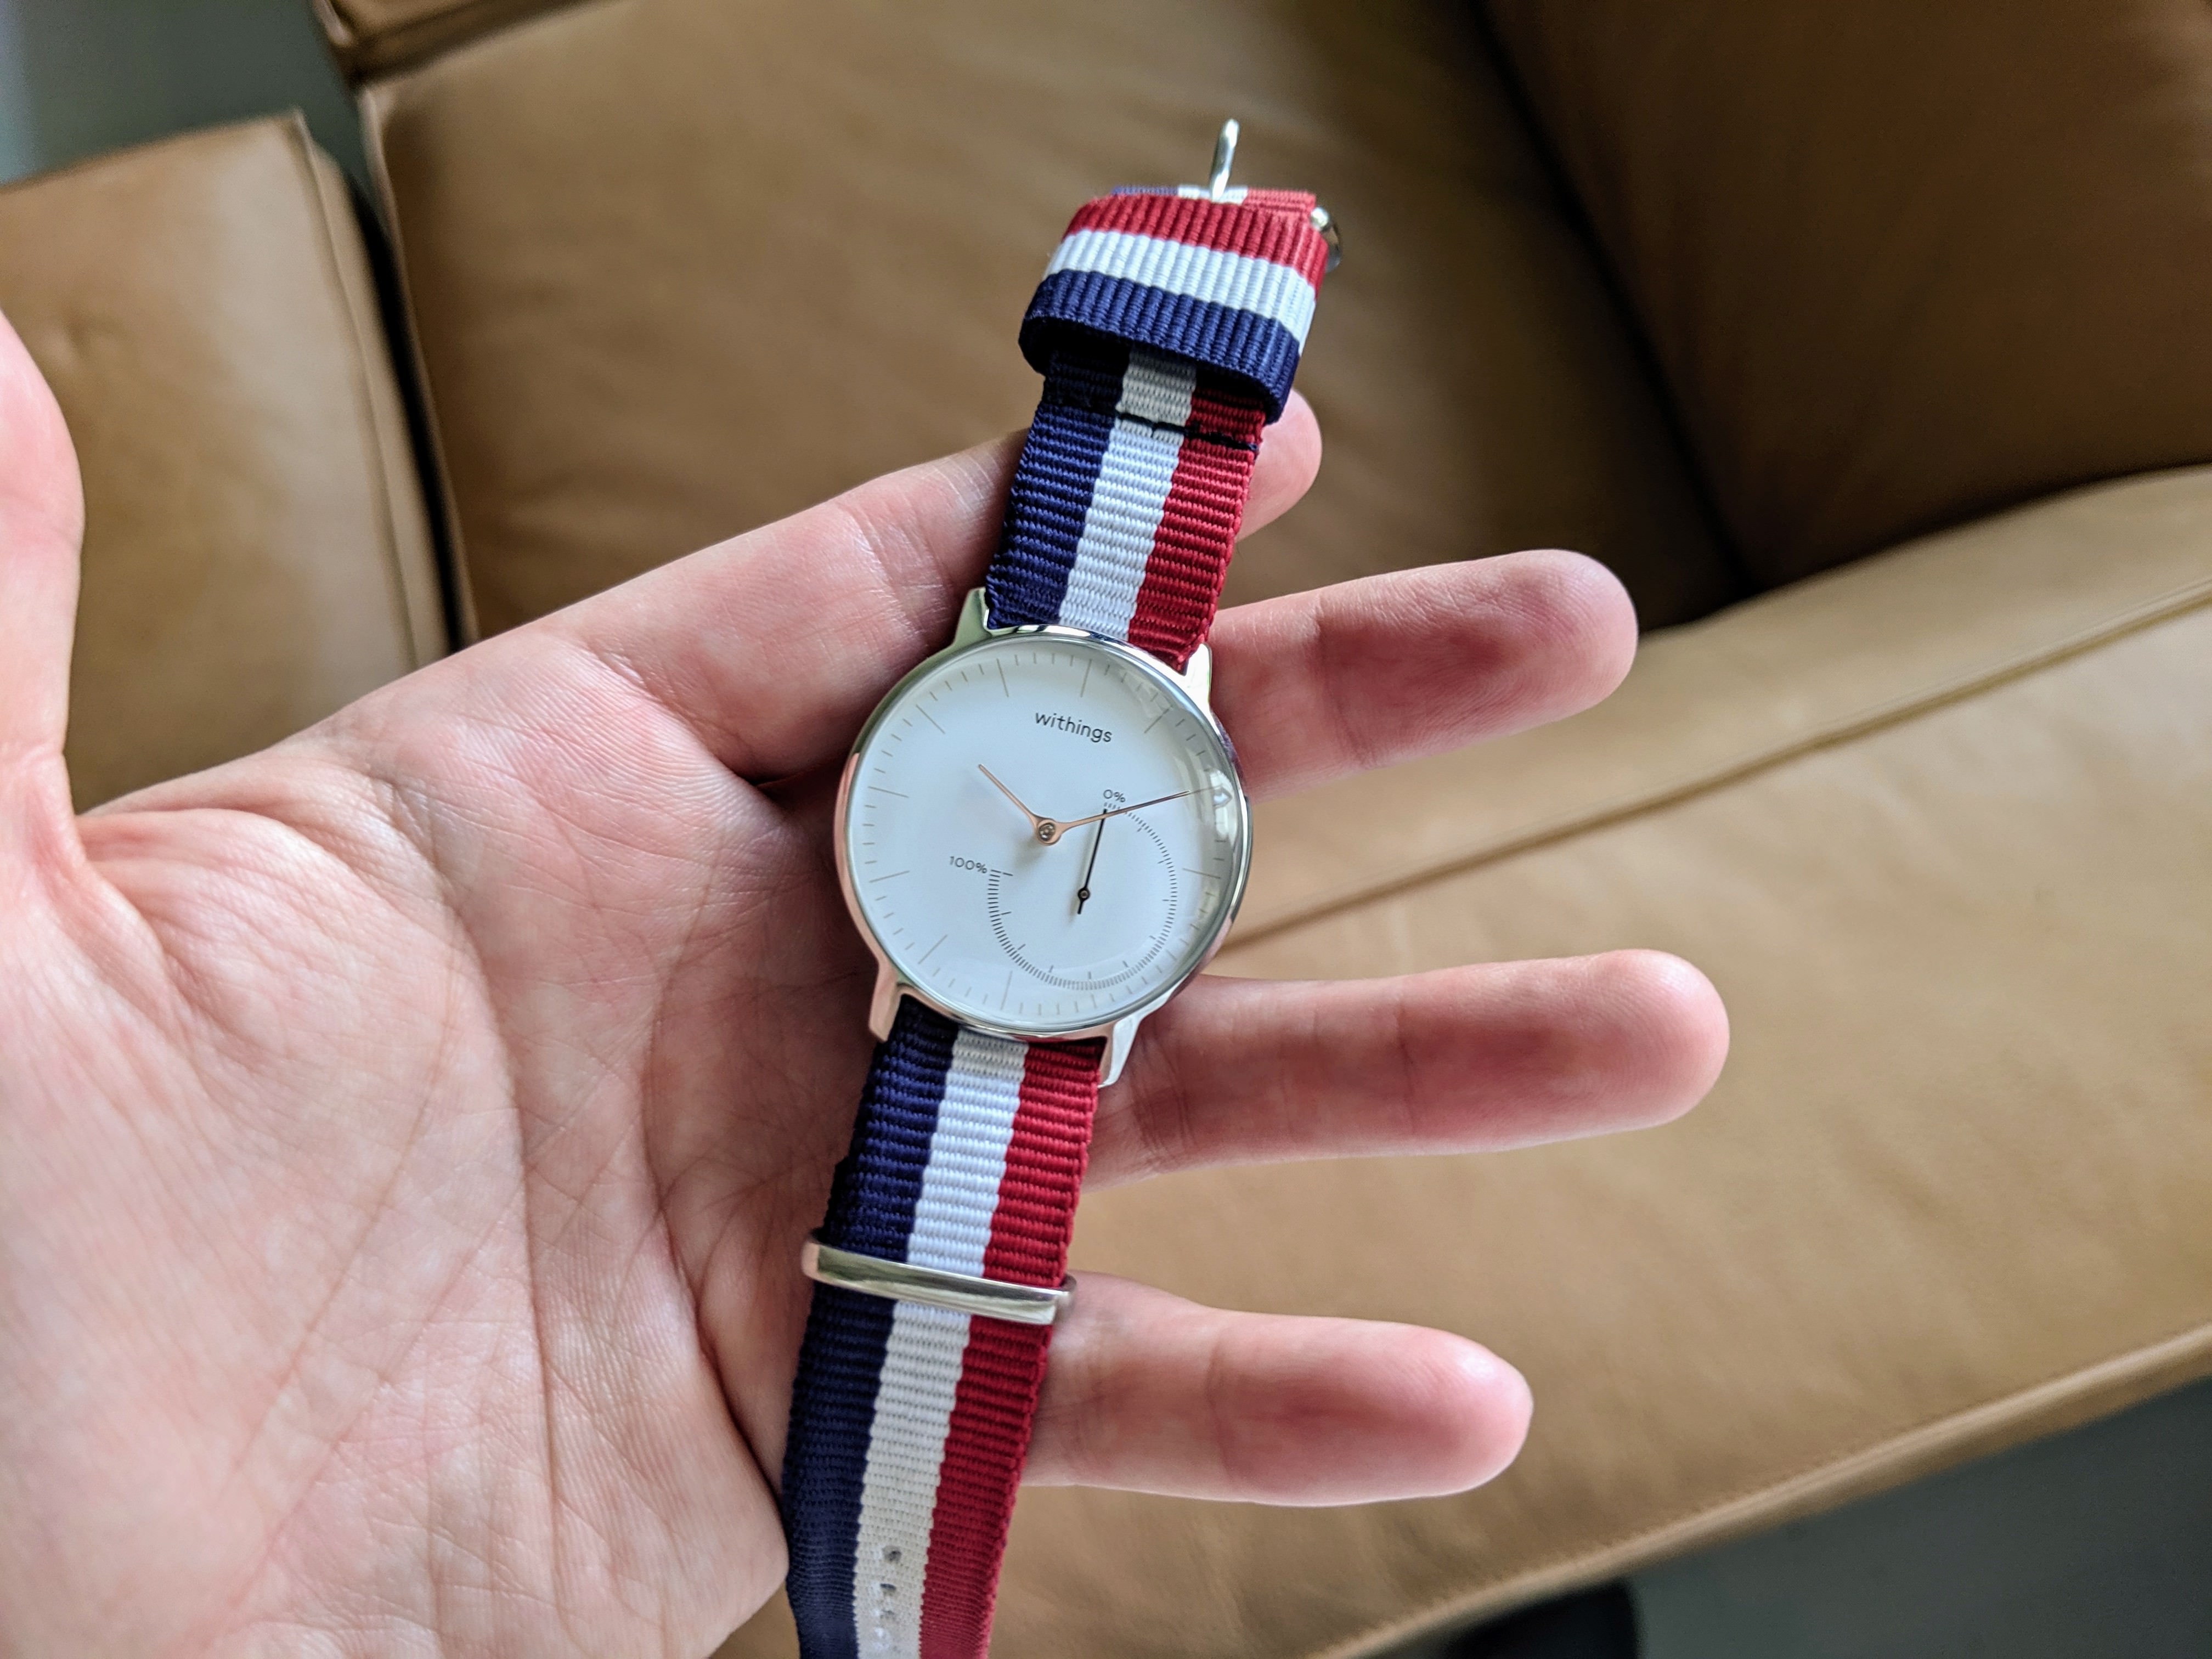 Replacing the Withings with Band Steel Strap Product a Reviews NATO - - Notes